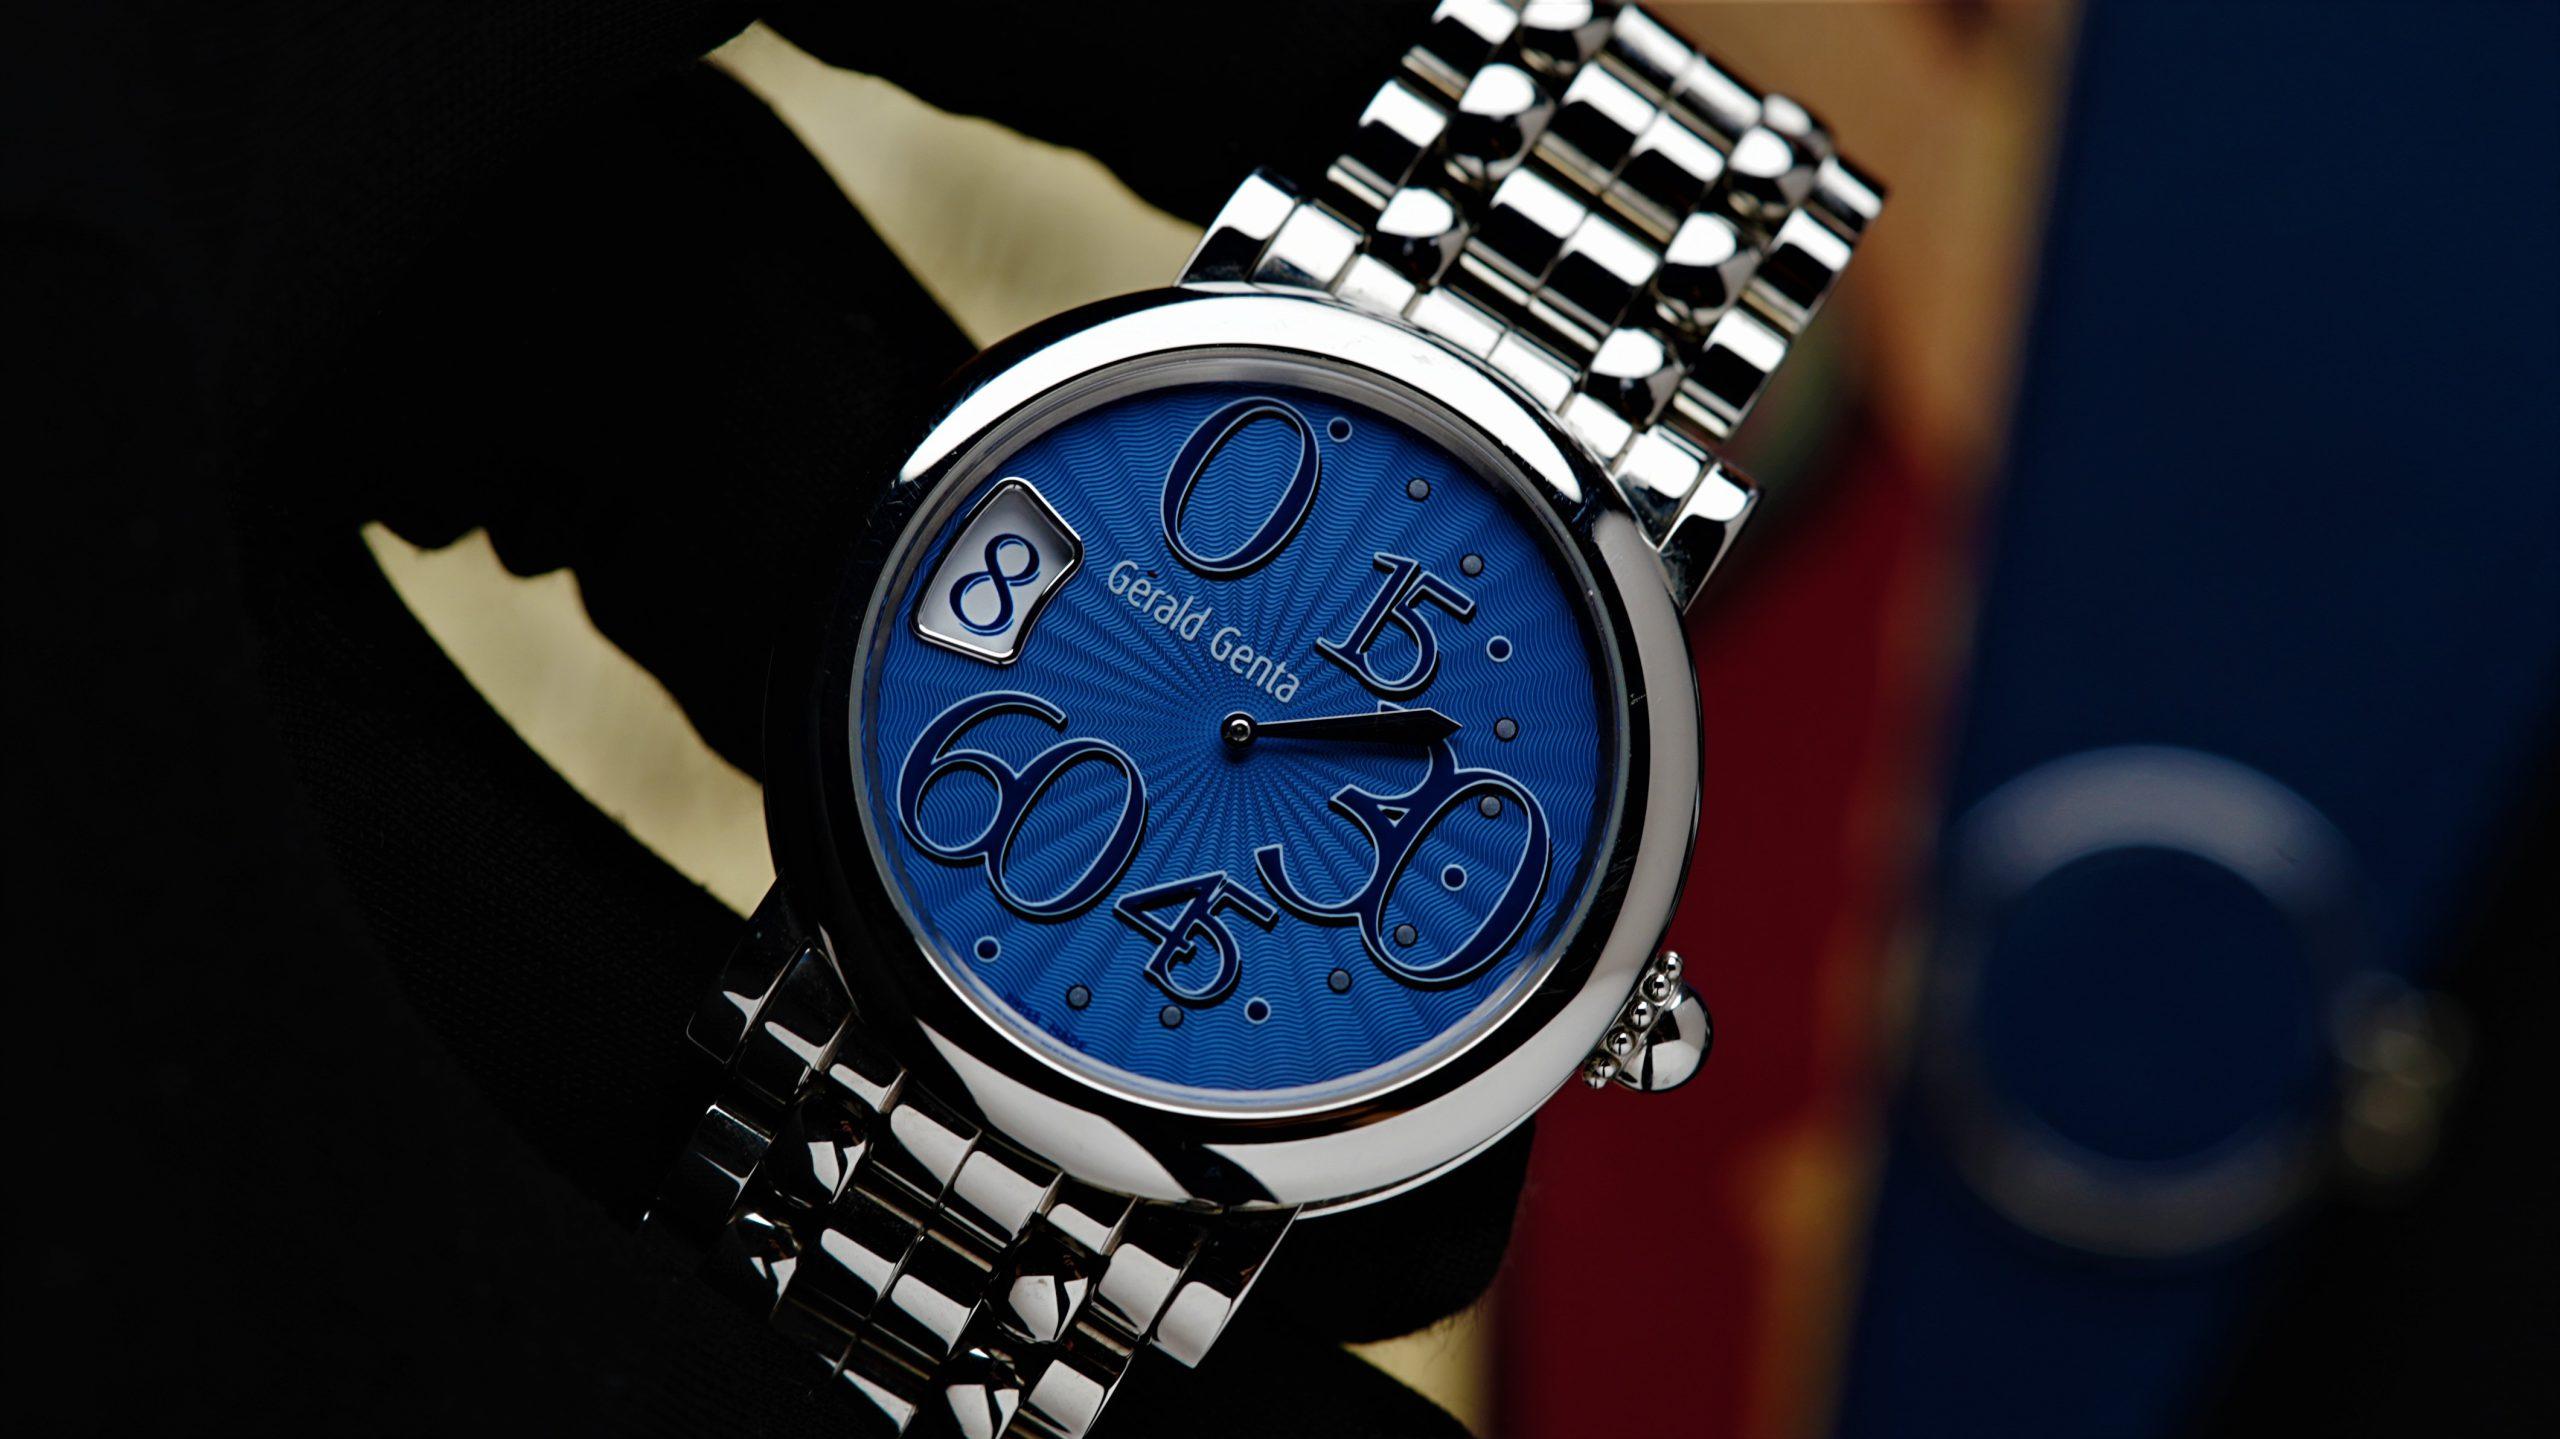 Gérald Genta Retro Classic Extremely Rare Blue Guilloche Dial Jump Hour watch being held in hand.